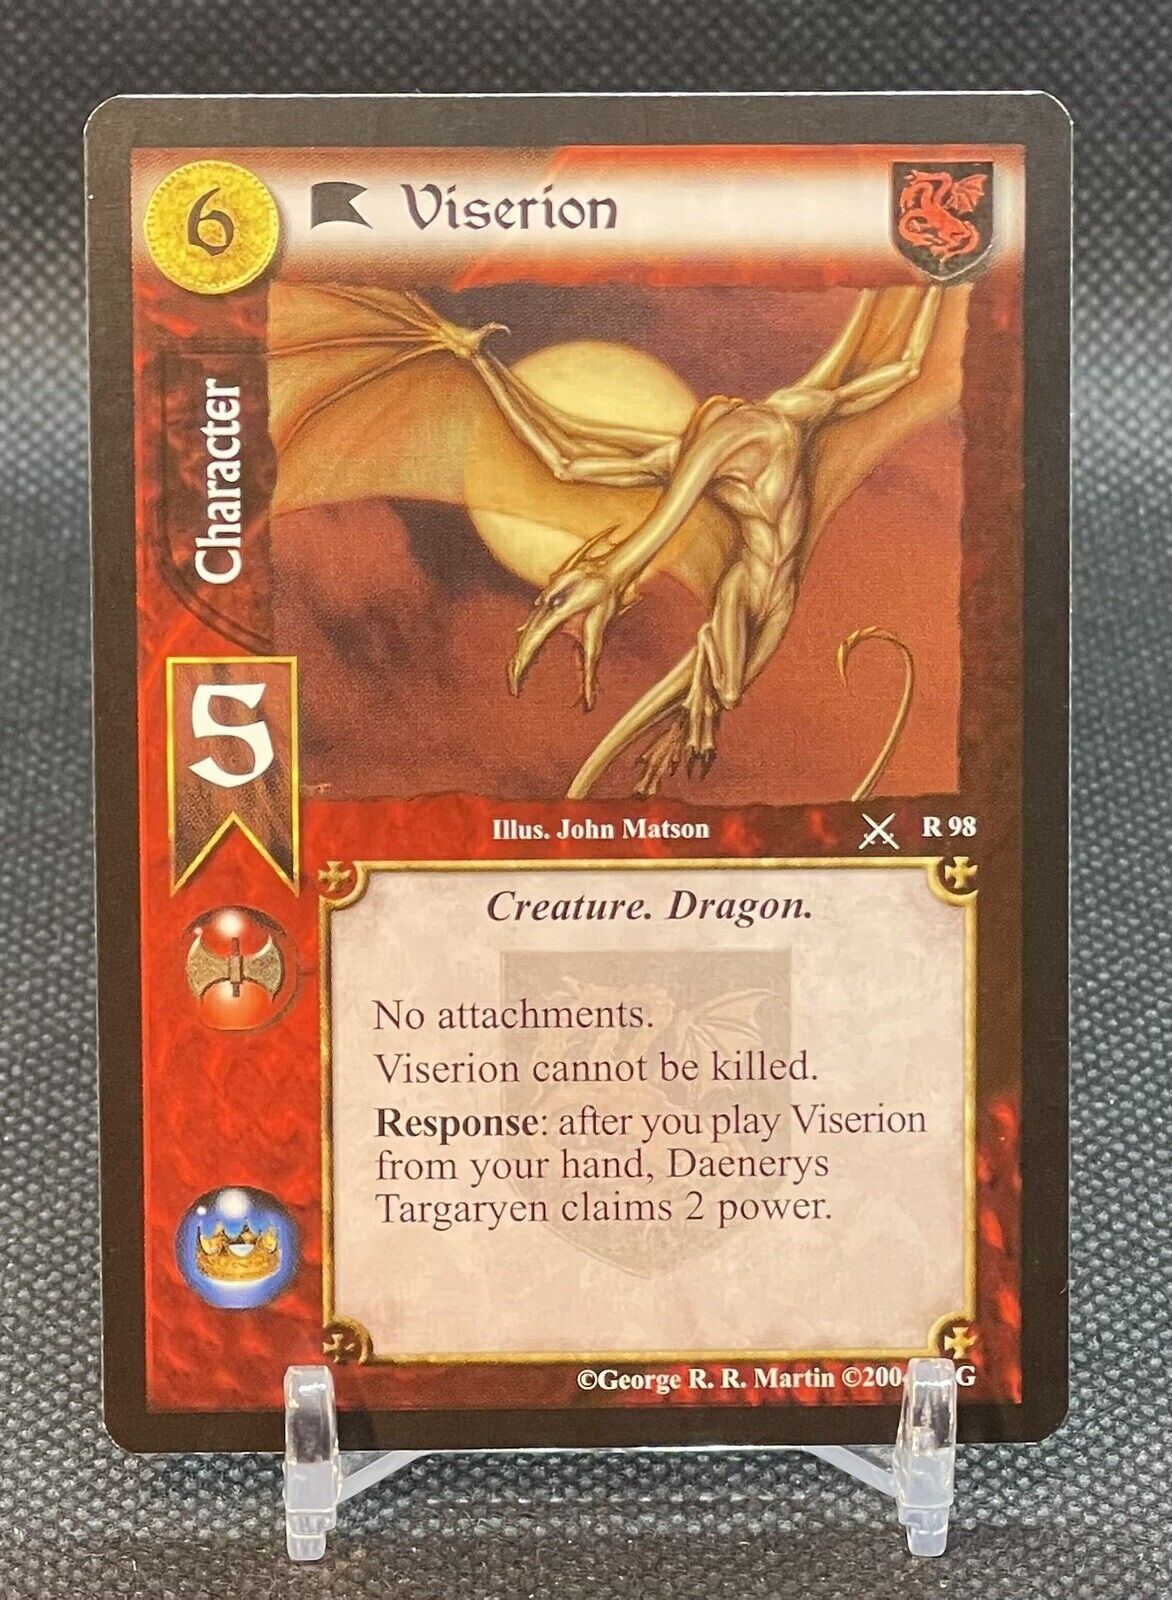 2004 Game of Thrones CCG Valyrian Edition Viserion R98 🎆